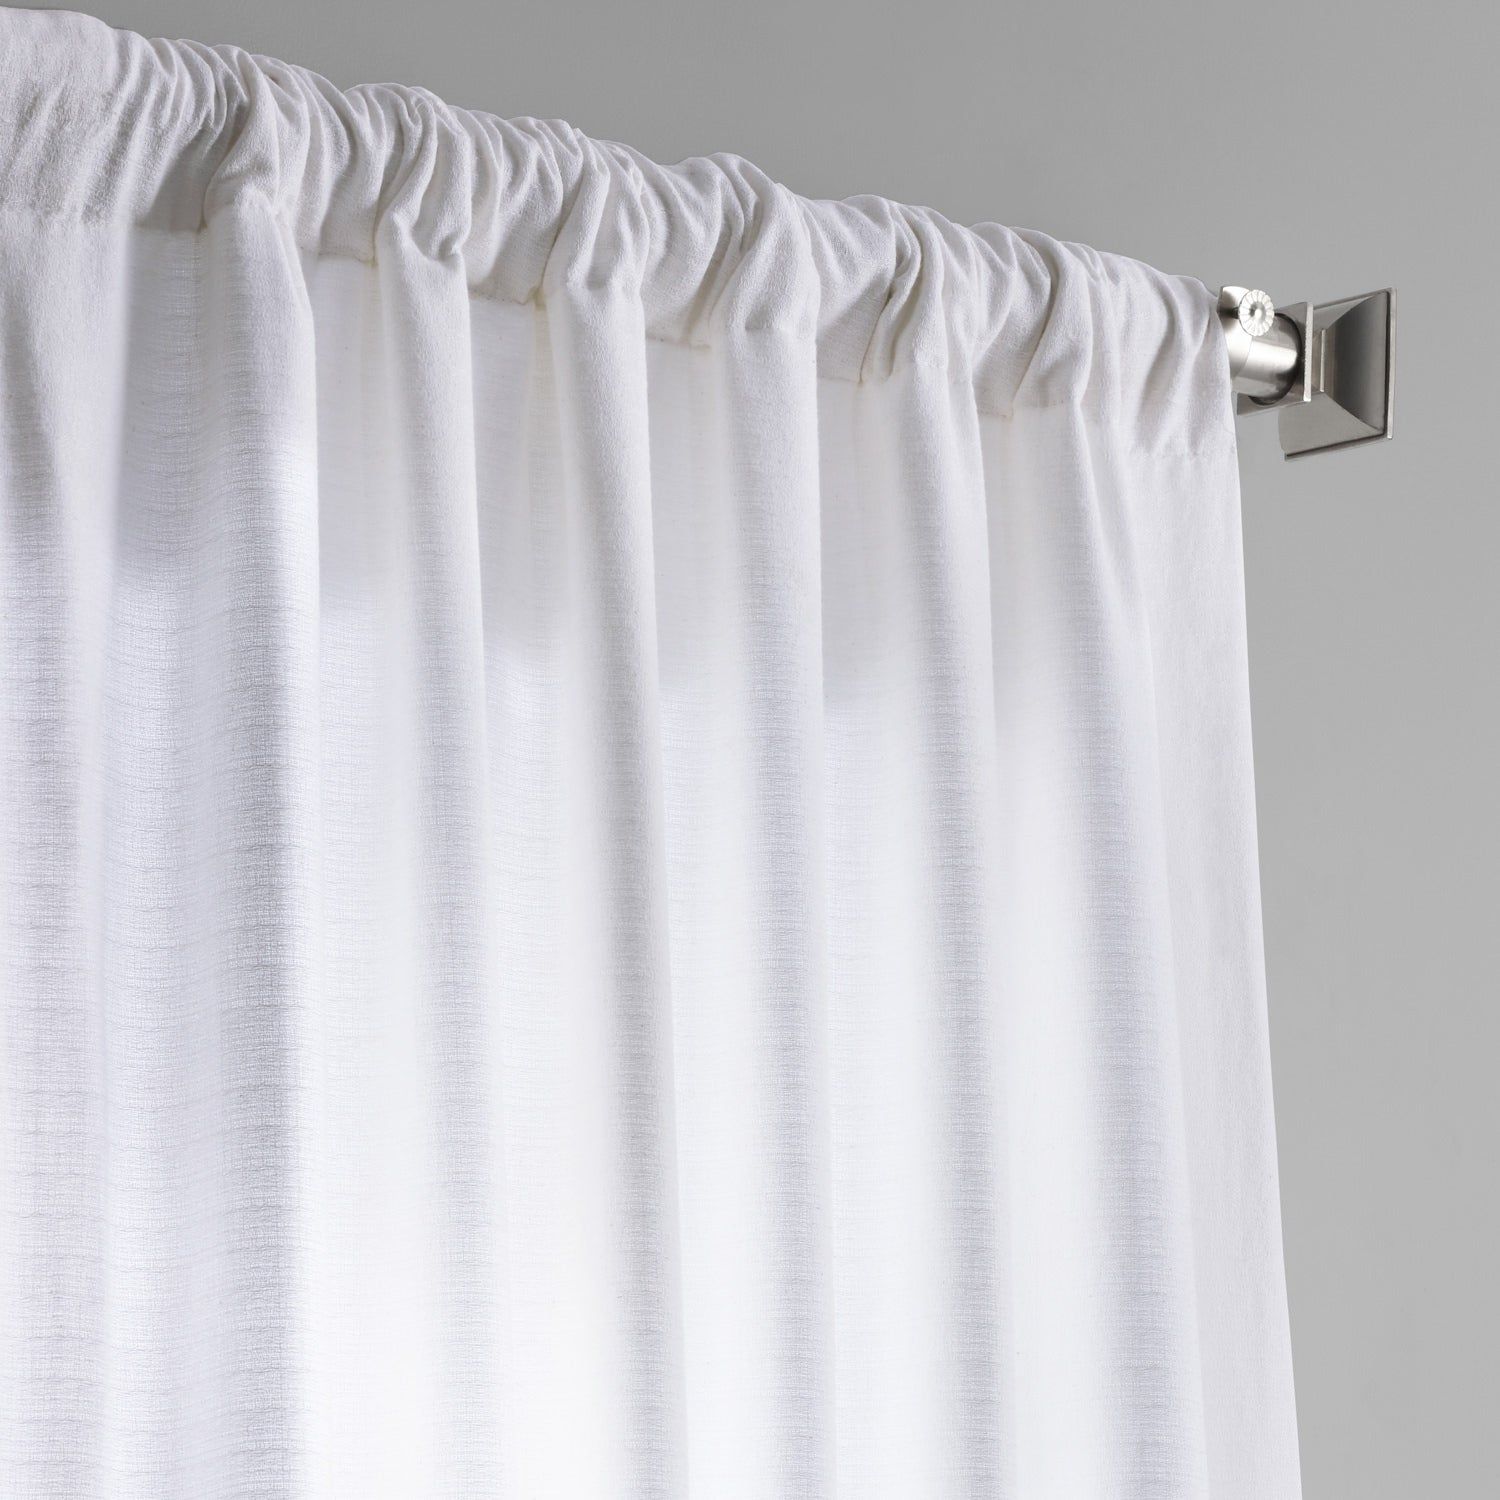 Shop Exclusive Fabrics Bark Weave Solid Cotton Curtain – On Regarding Bark Weave Solid Cotton Curtains (View 16 of 20)